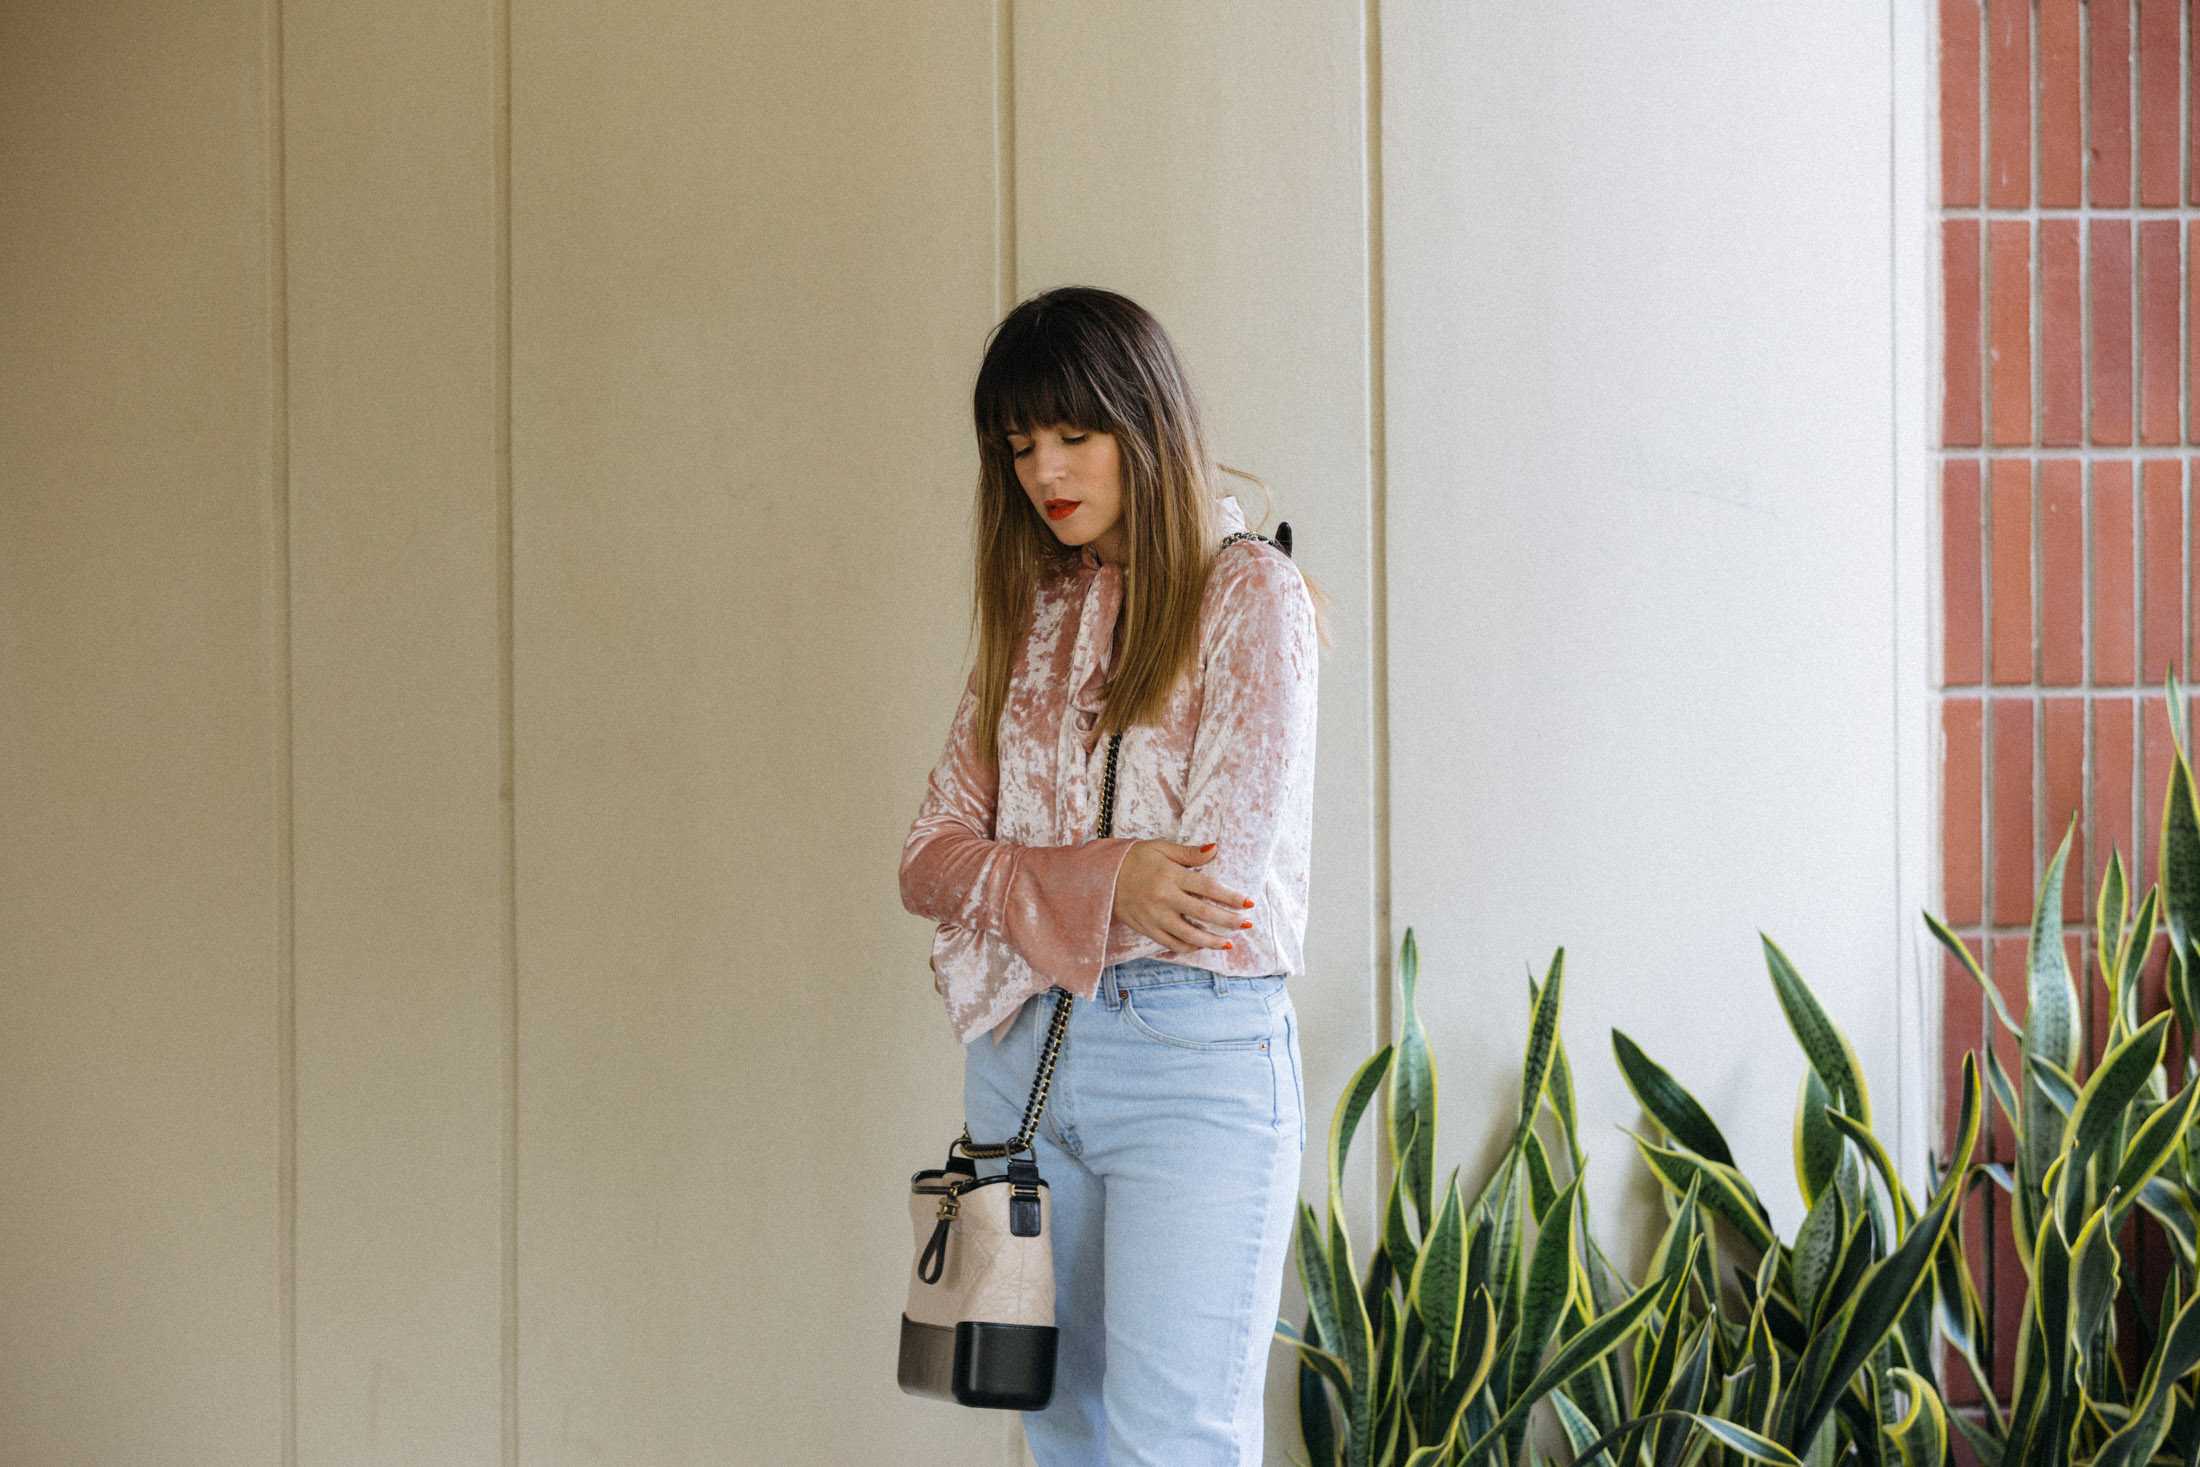 Maristella wears a crushed pink velvet shirt with pussy bow, vintage Levi's jeans and the Chanel Gabrielle bag as a long cross body bag